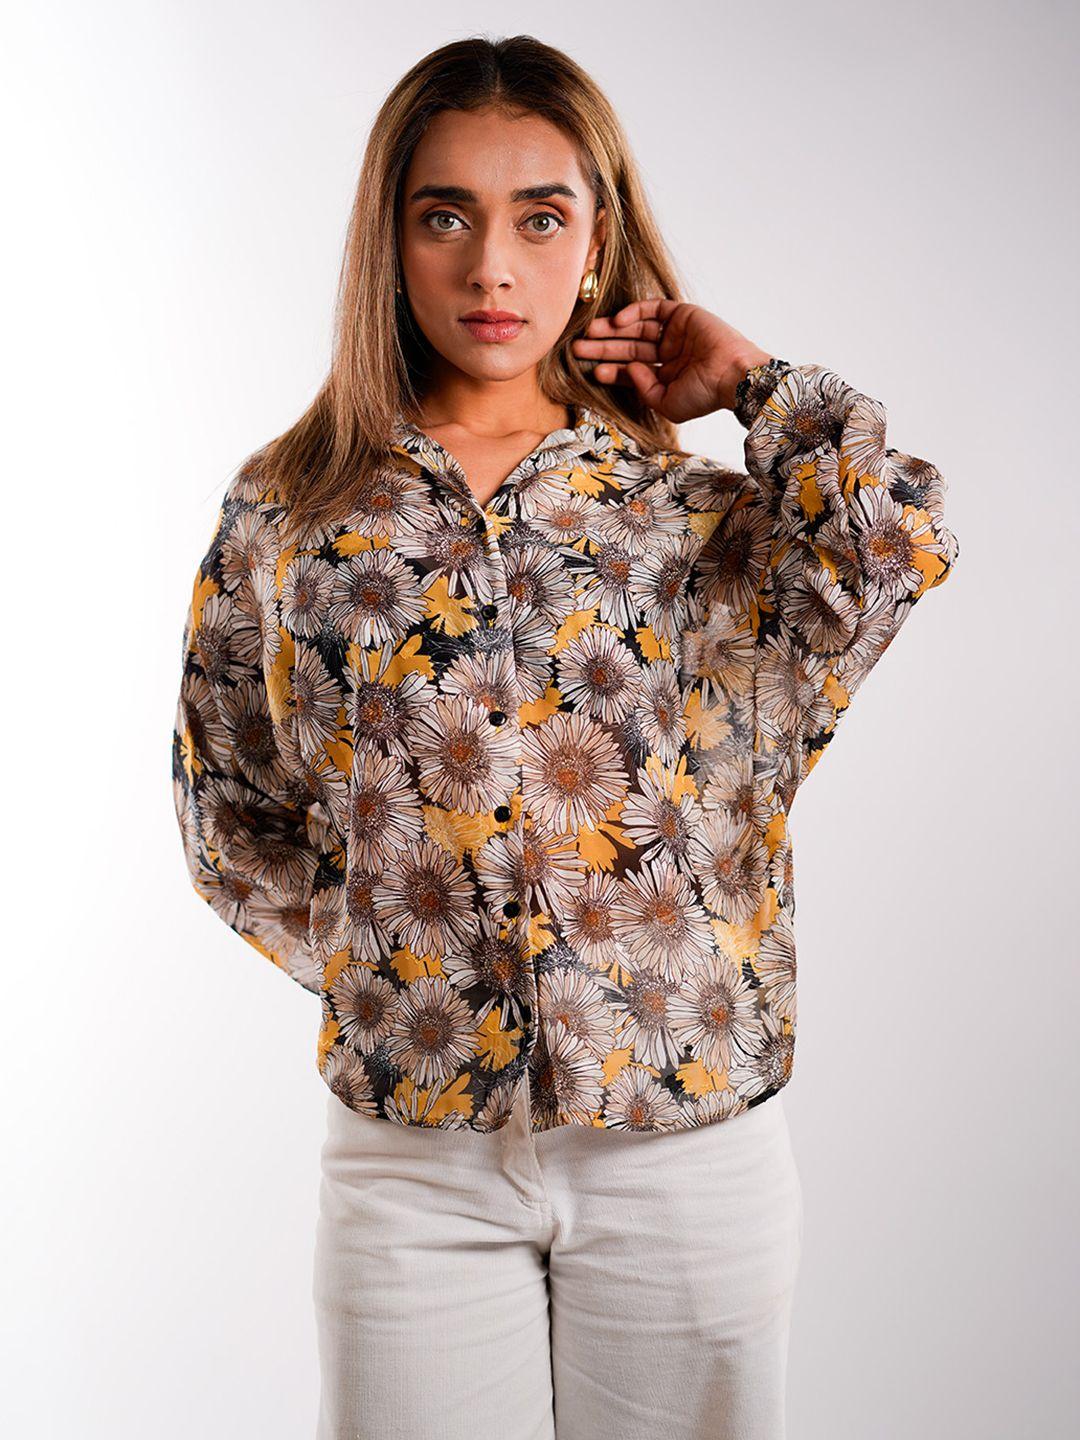 stylecast x hersheinbox floral printed oversized georgette casual semi sheer shirt